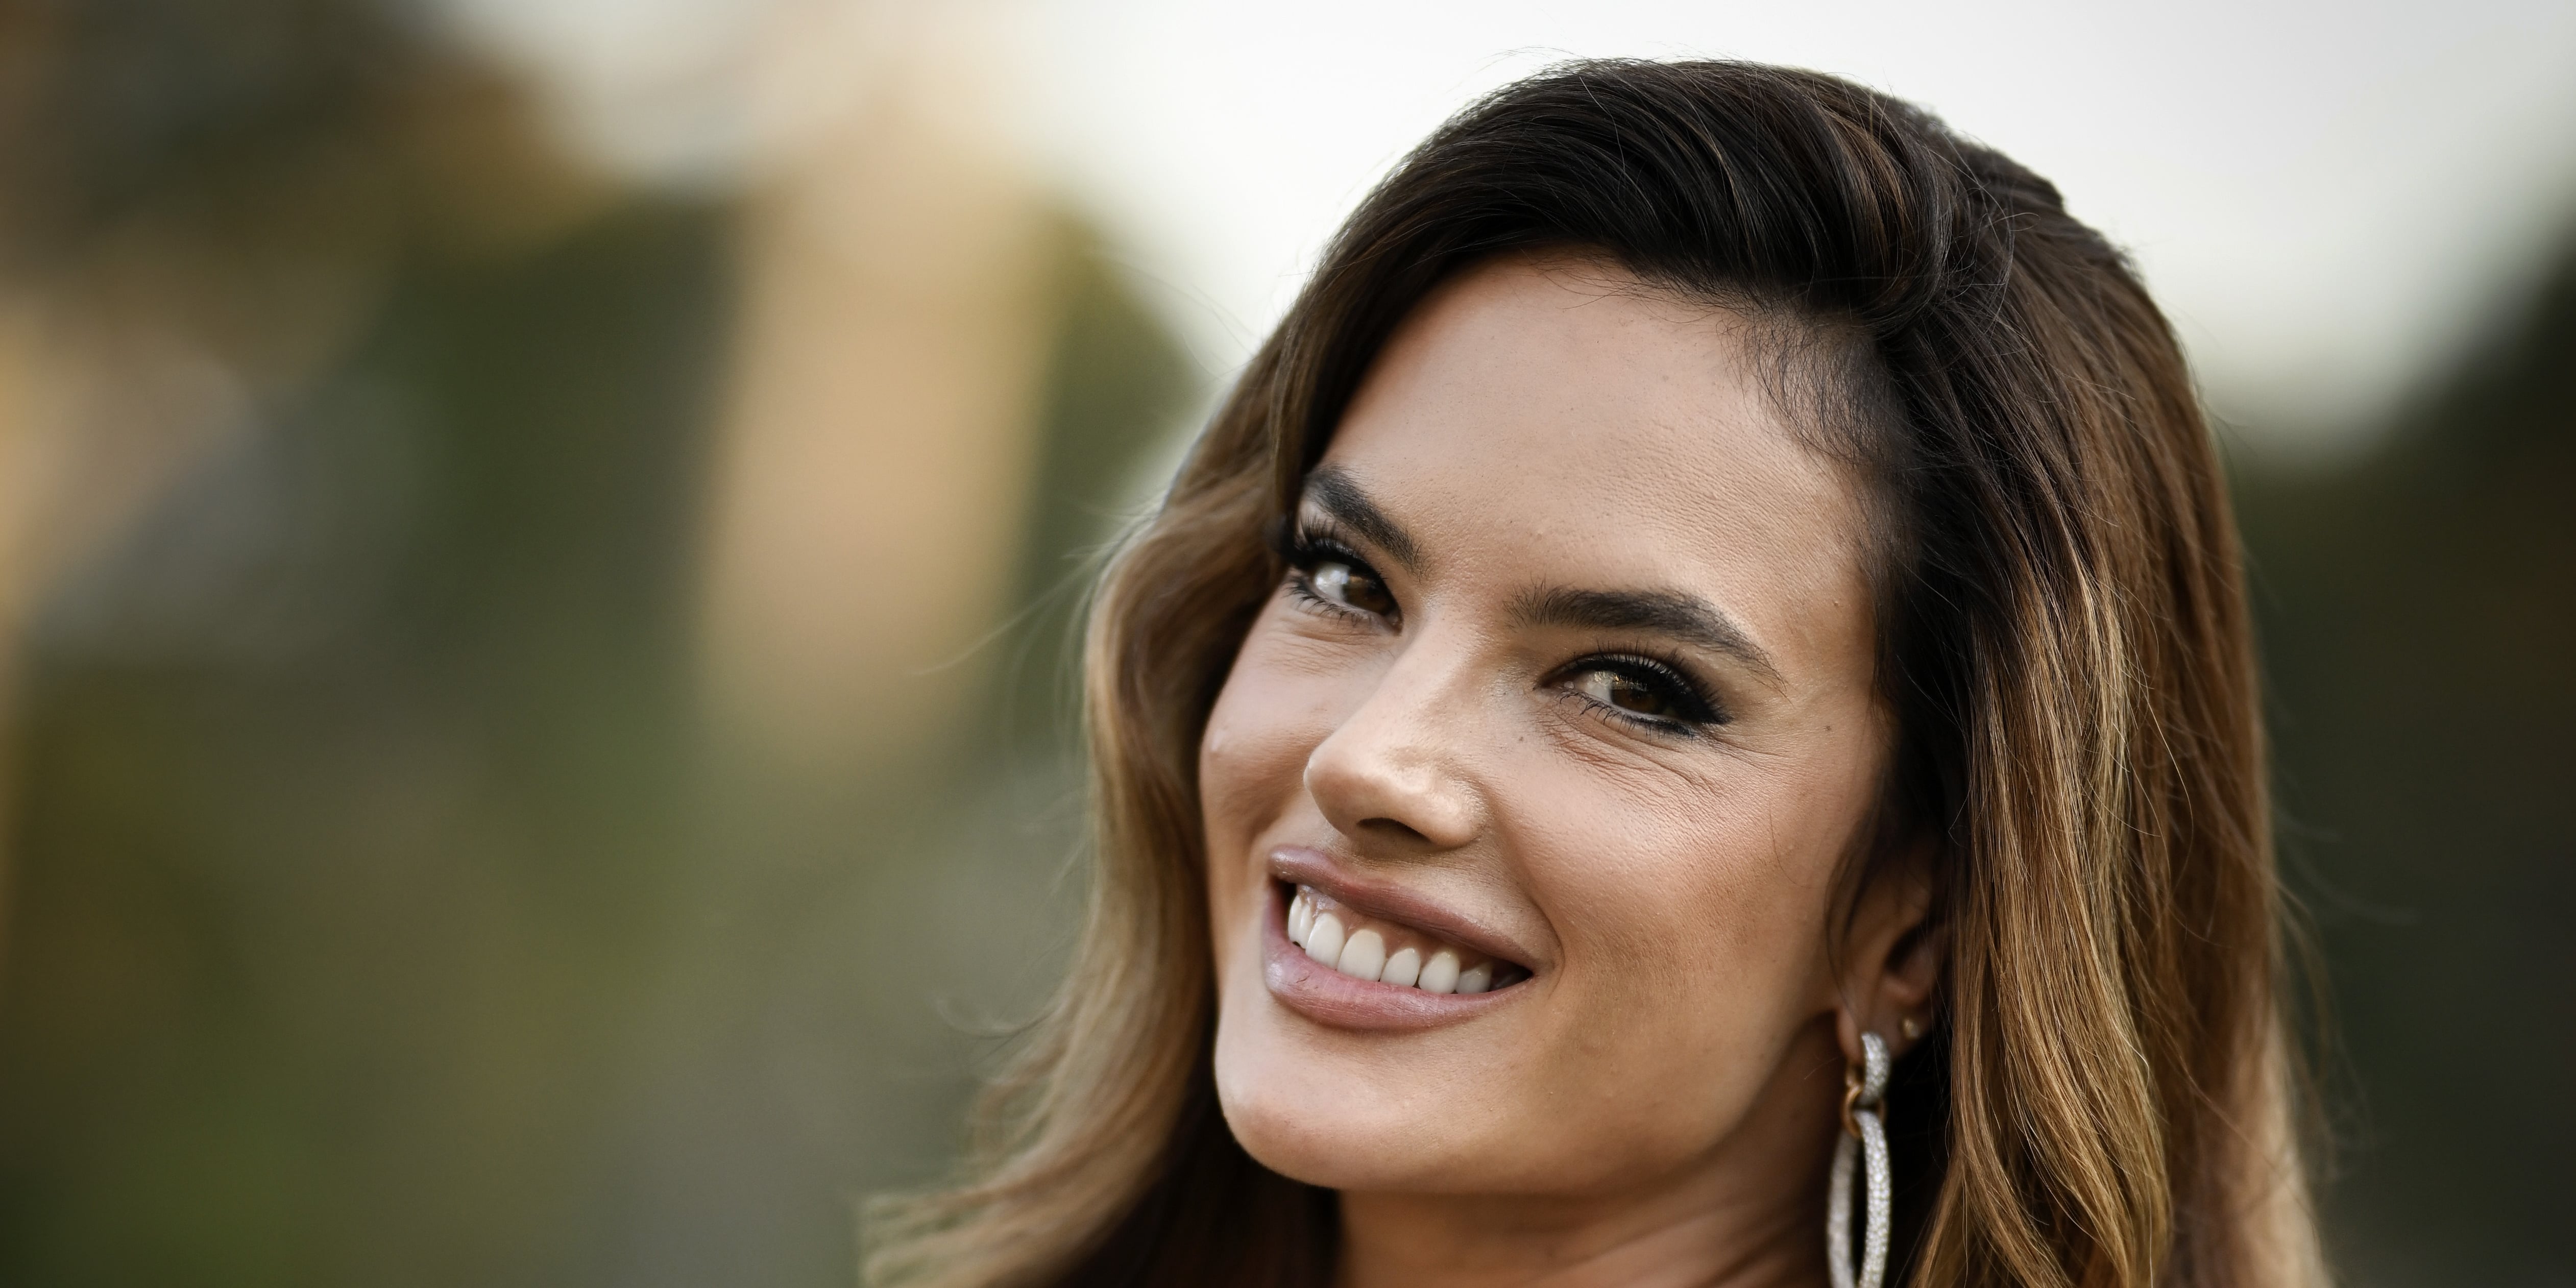 Alessandra Ambrosio’s Pride Nails With Mismatched Designs | POPSUGAR Beauty